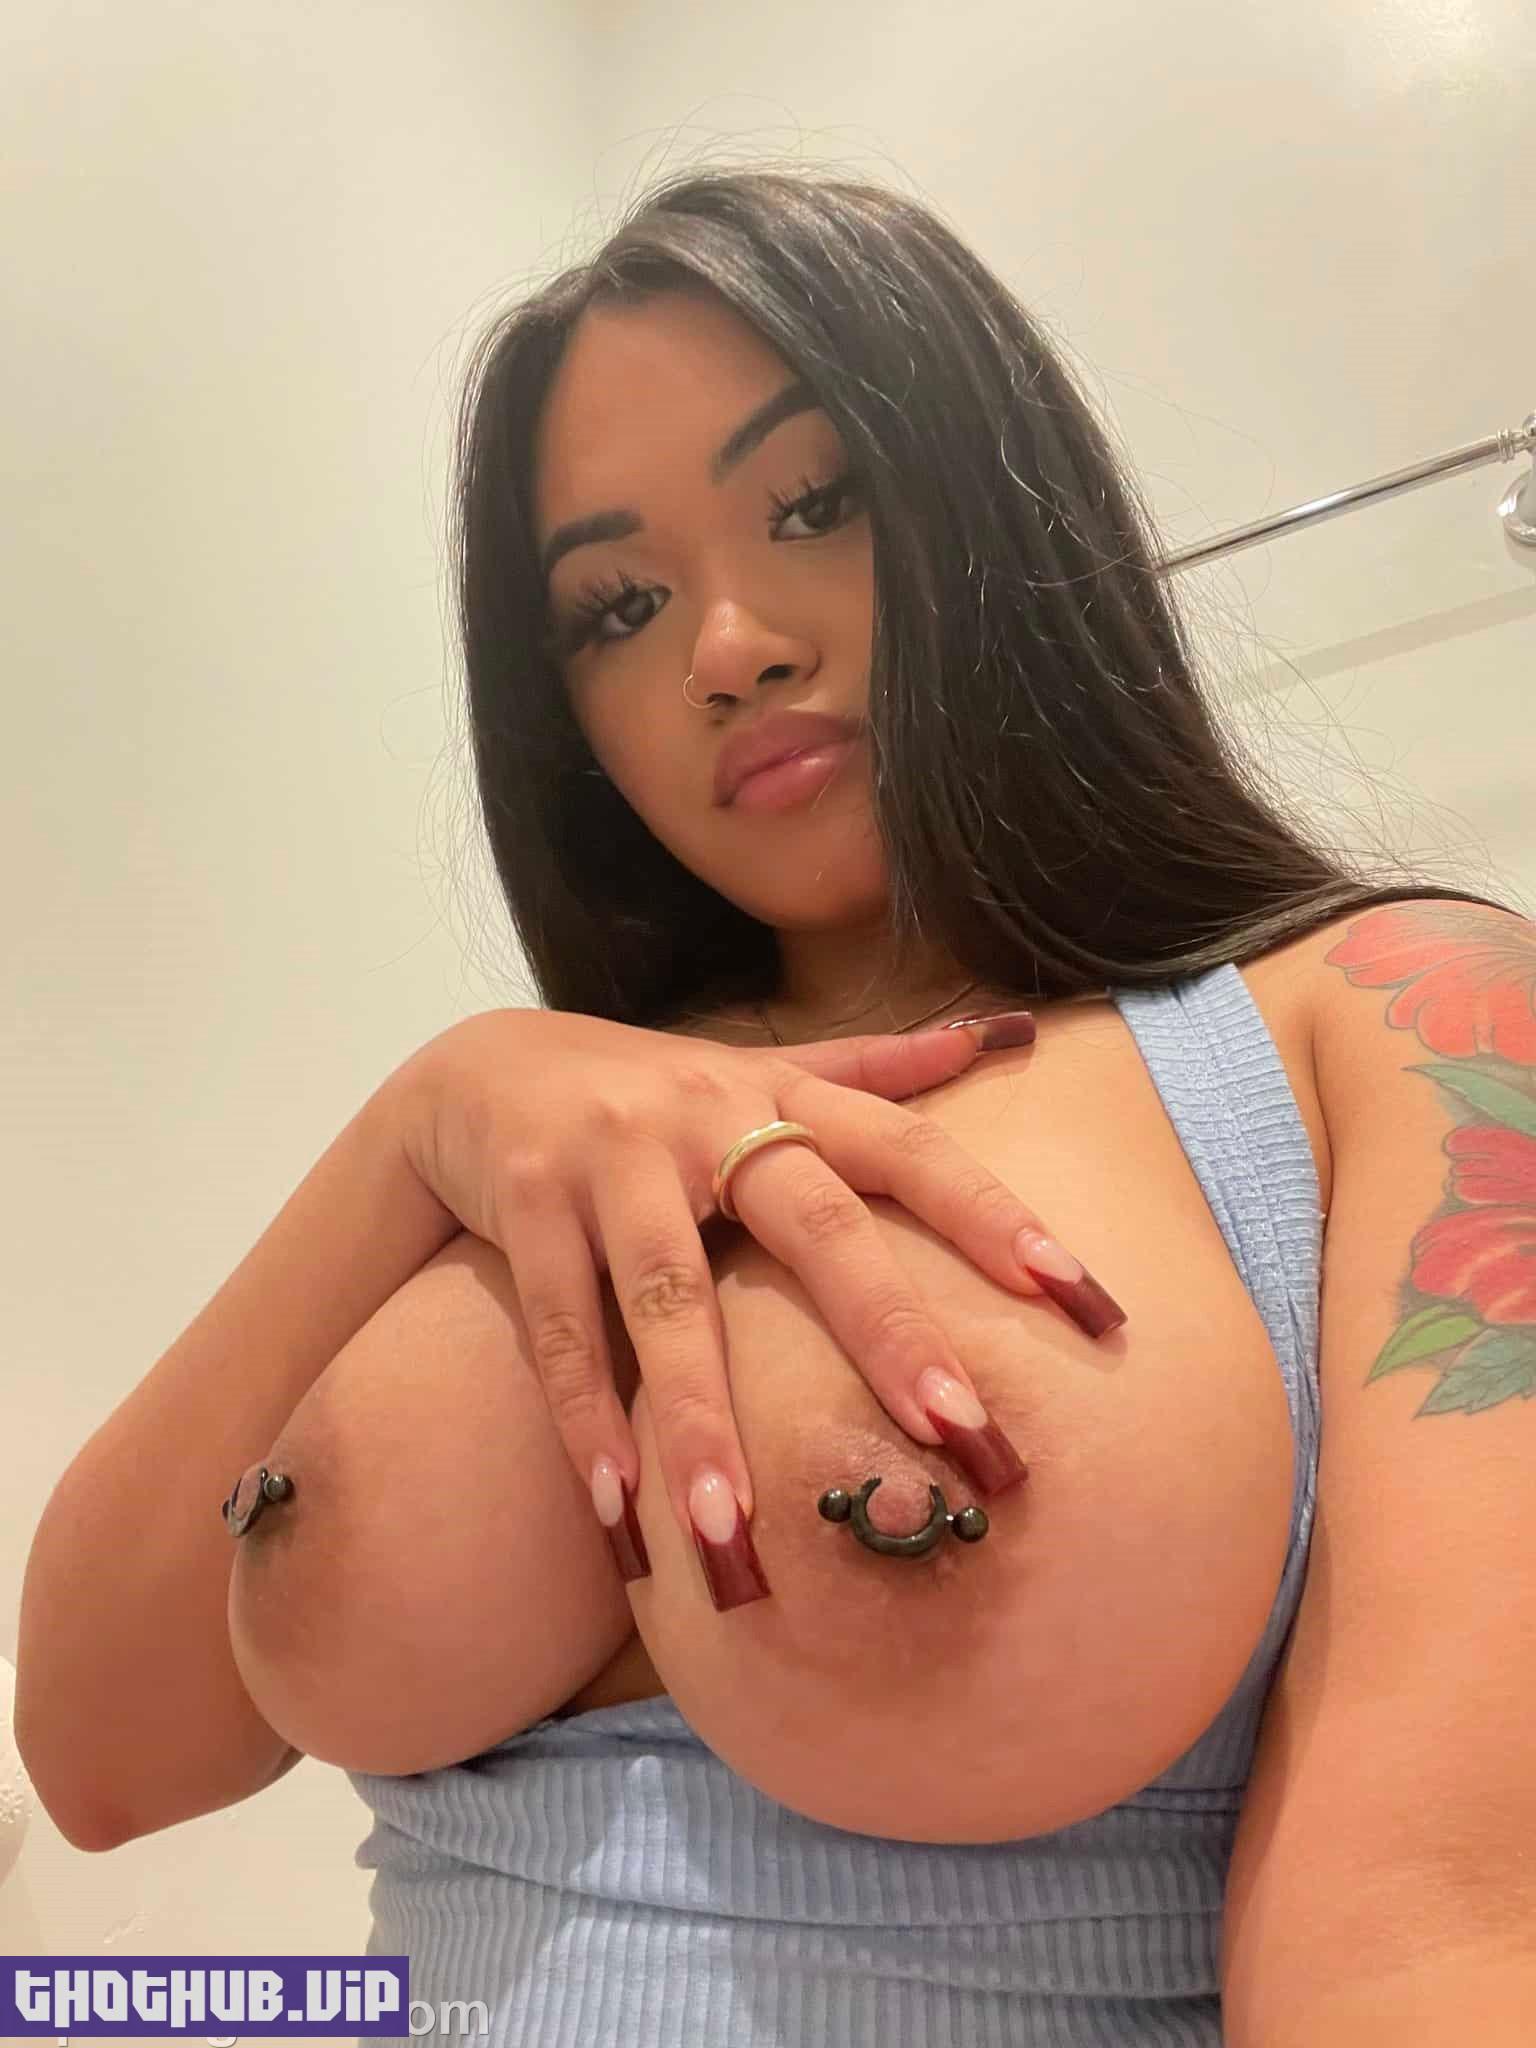 1660939589 715 Thotayana %E2%80%93 Busty Asian Thot Onlyfans Nudes